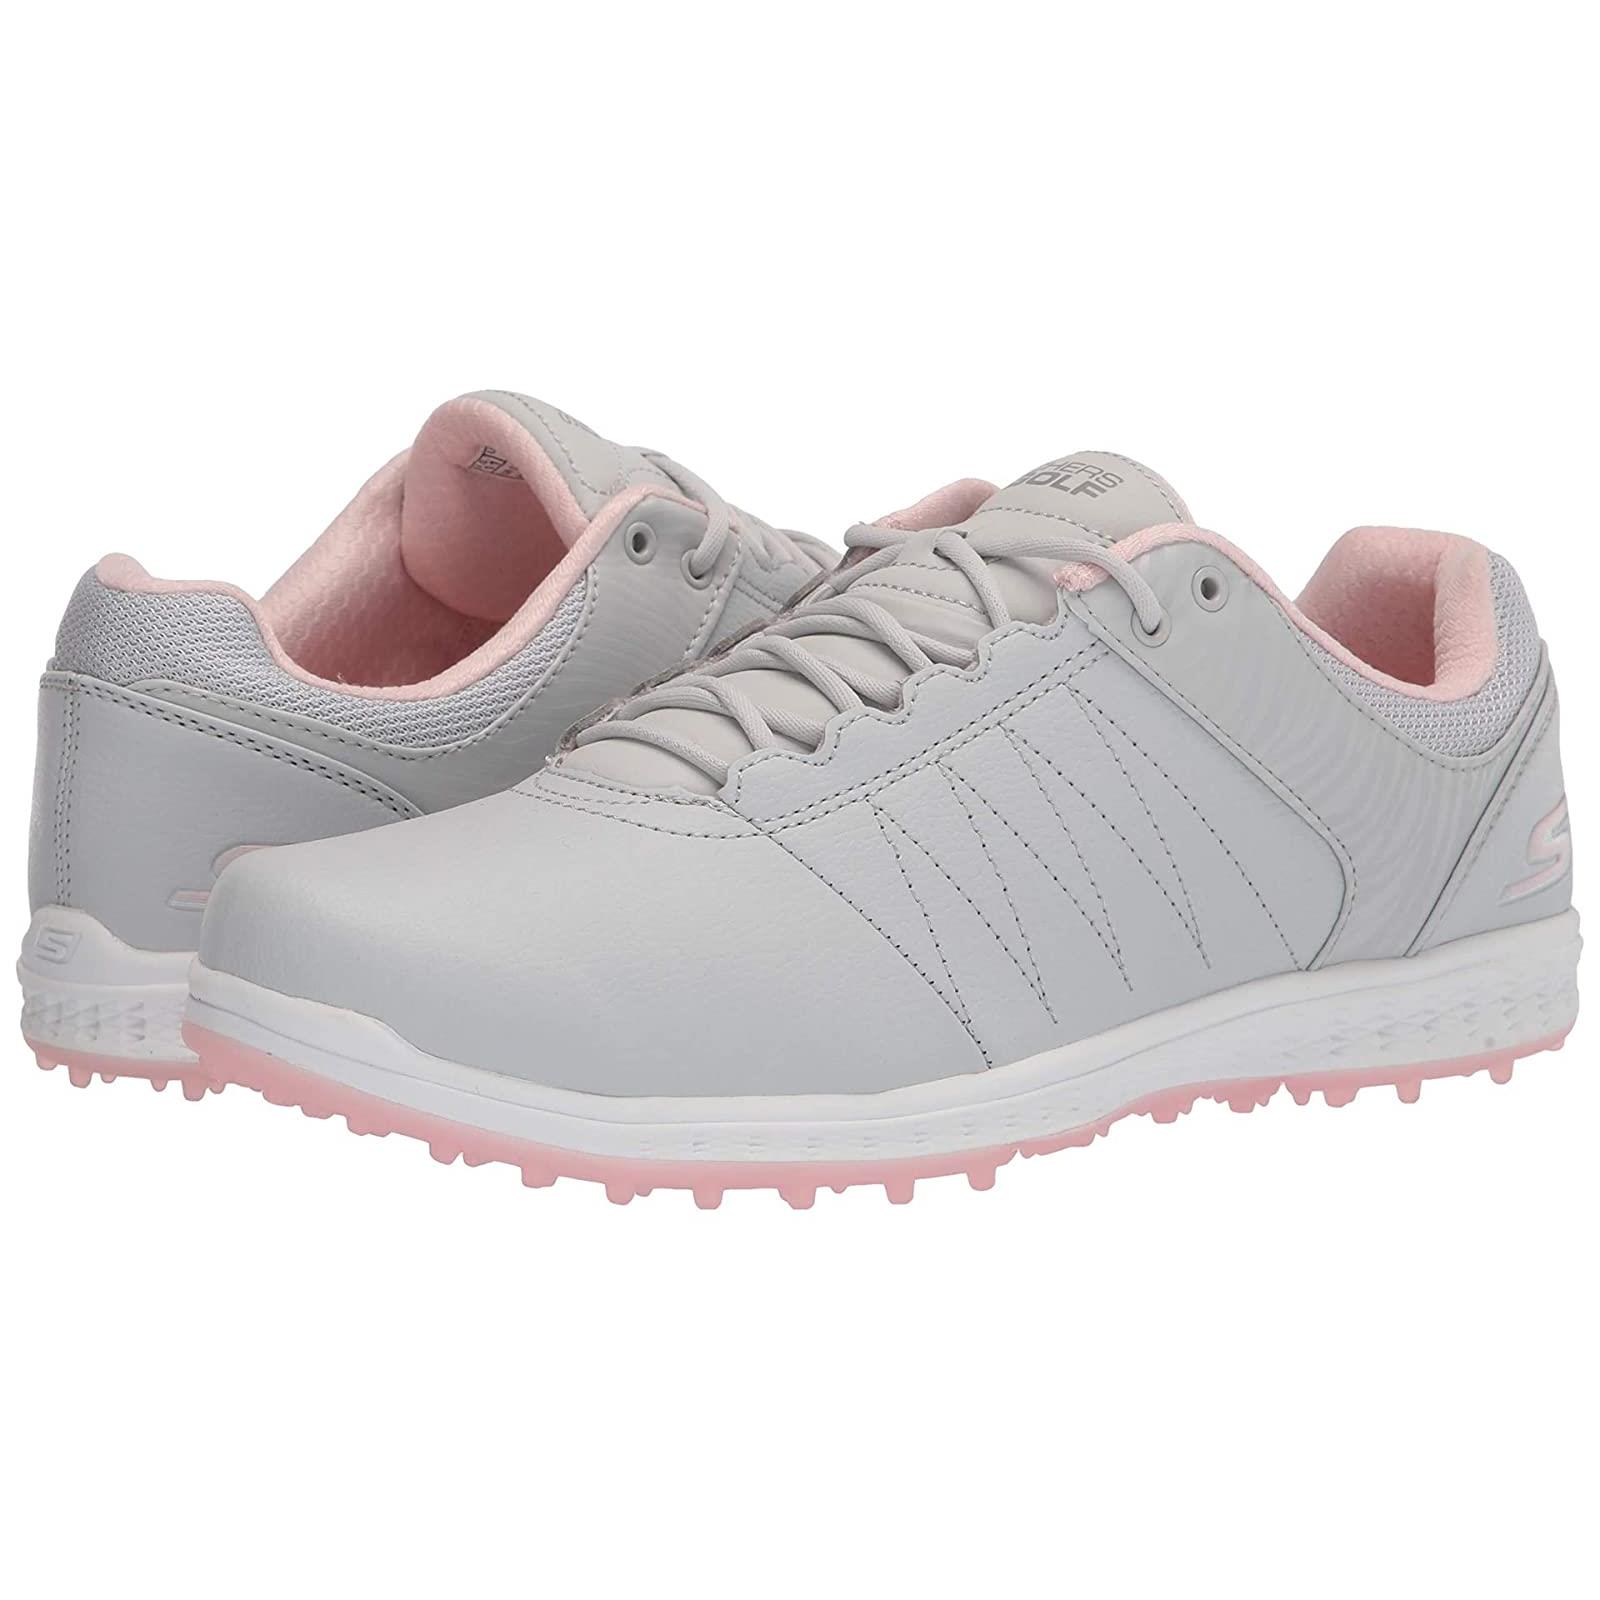 Woman`s Sneakers Athletic Shoes Skechers GO Golf Pivot Light Grey/Pink